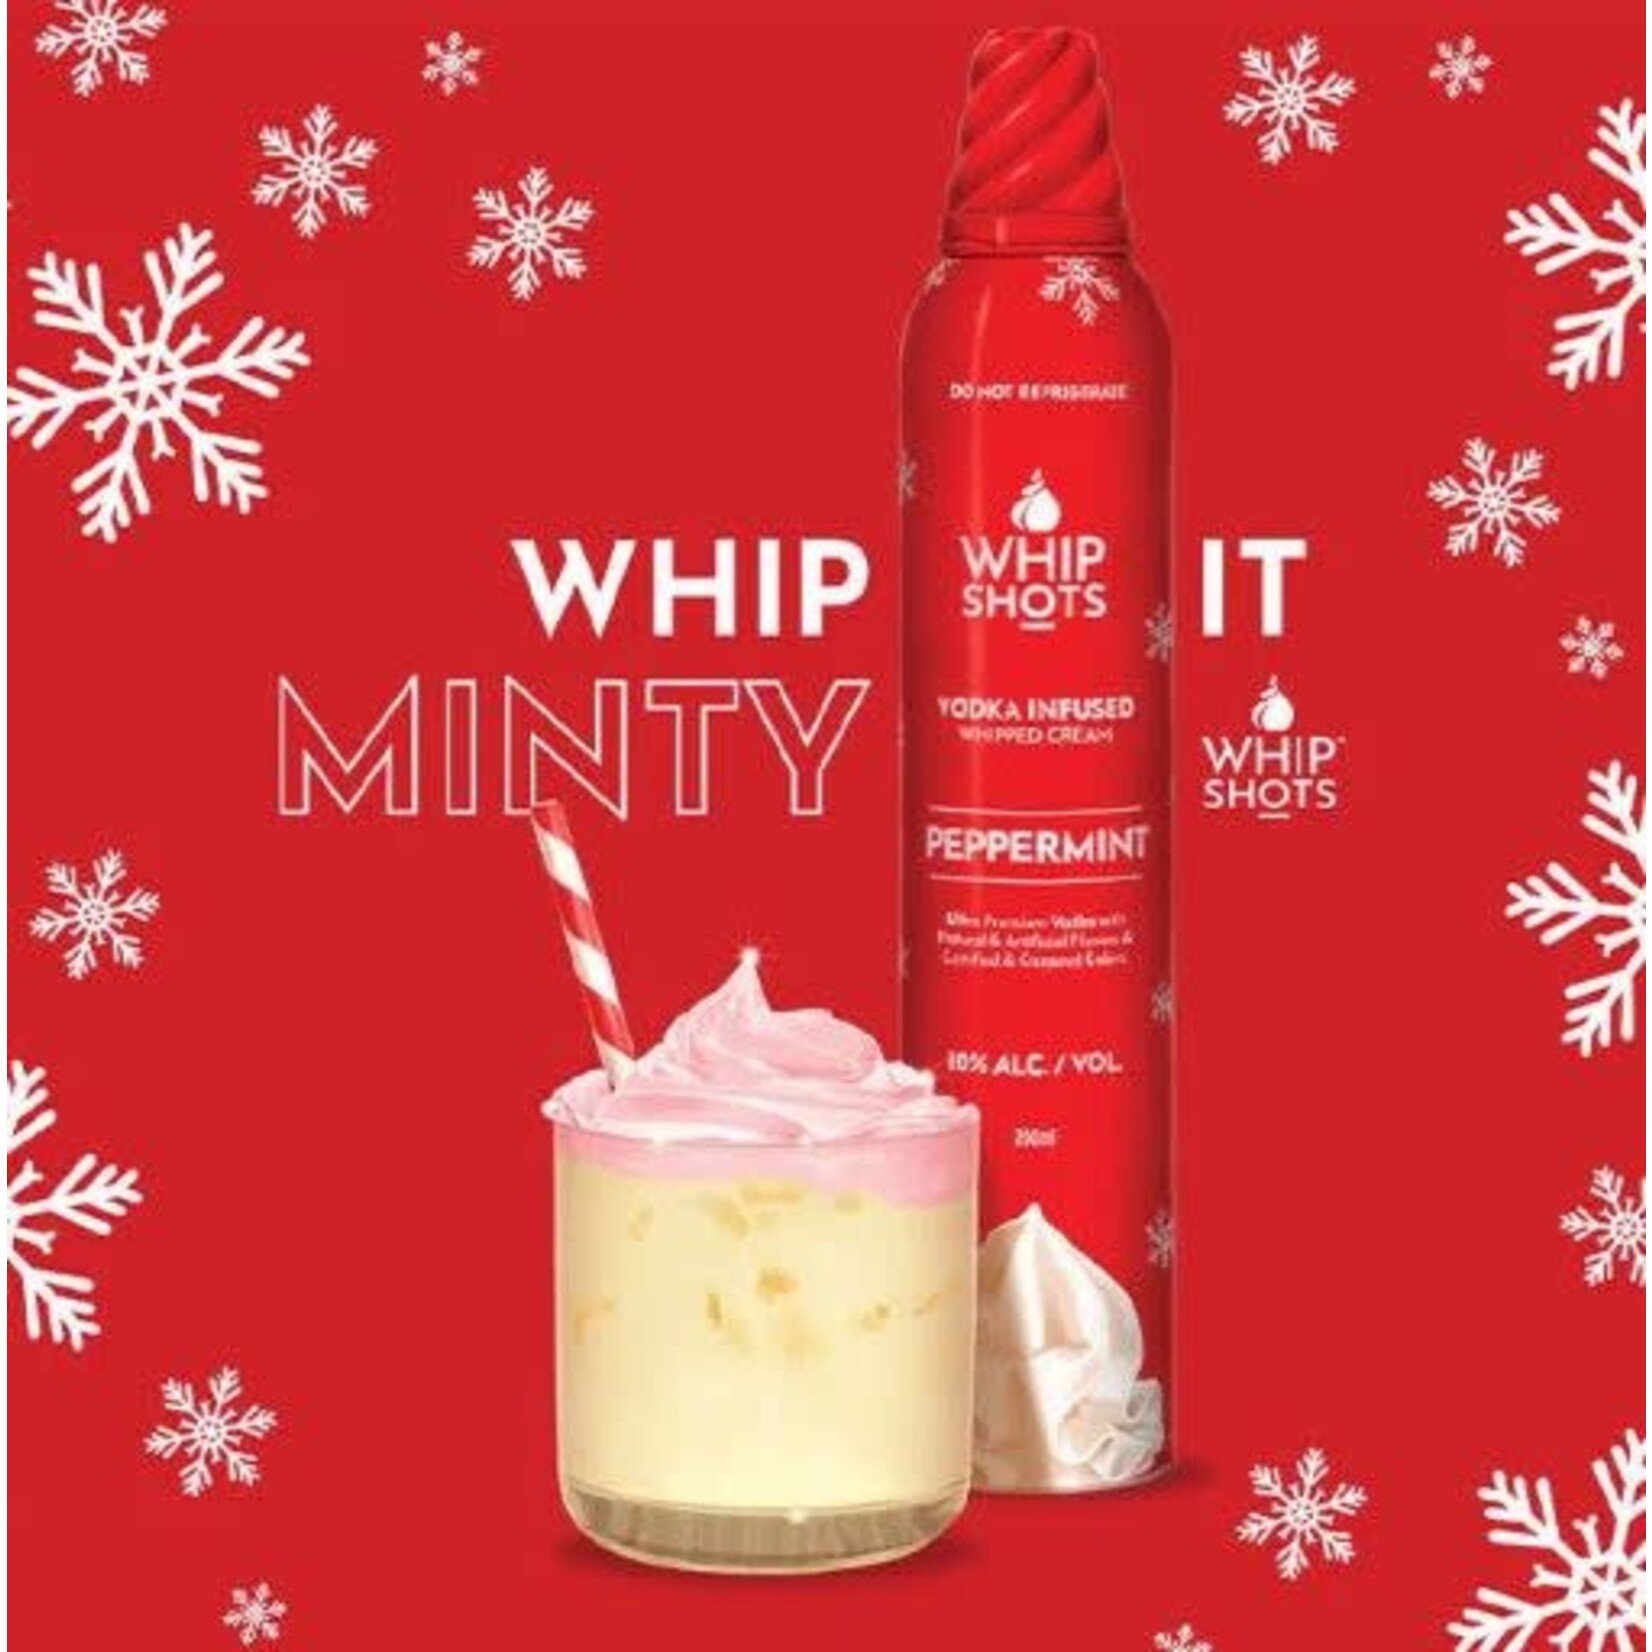 Whip Shots Vodka Infused Whipped Cream Peppermint